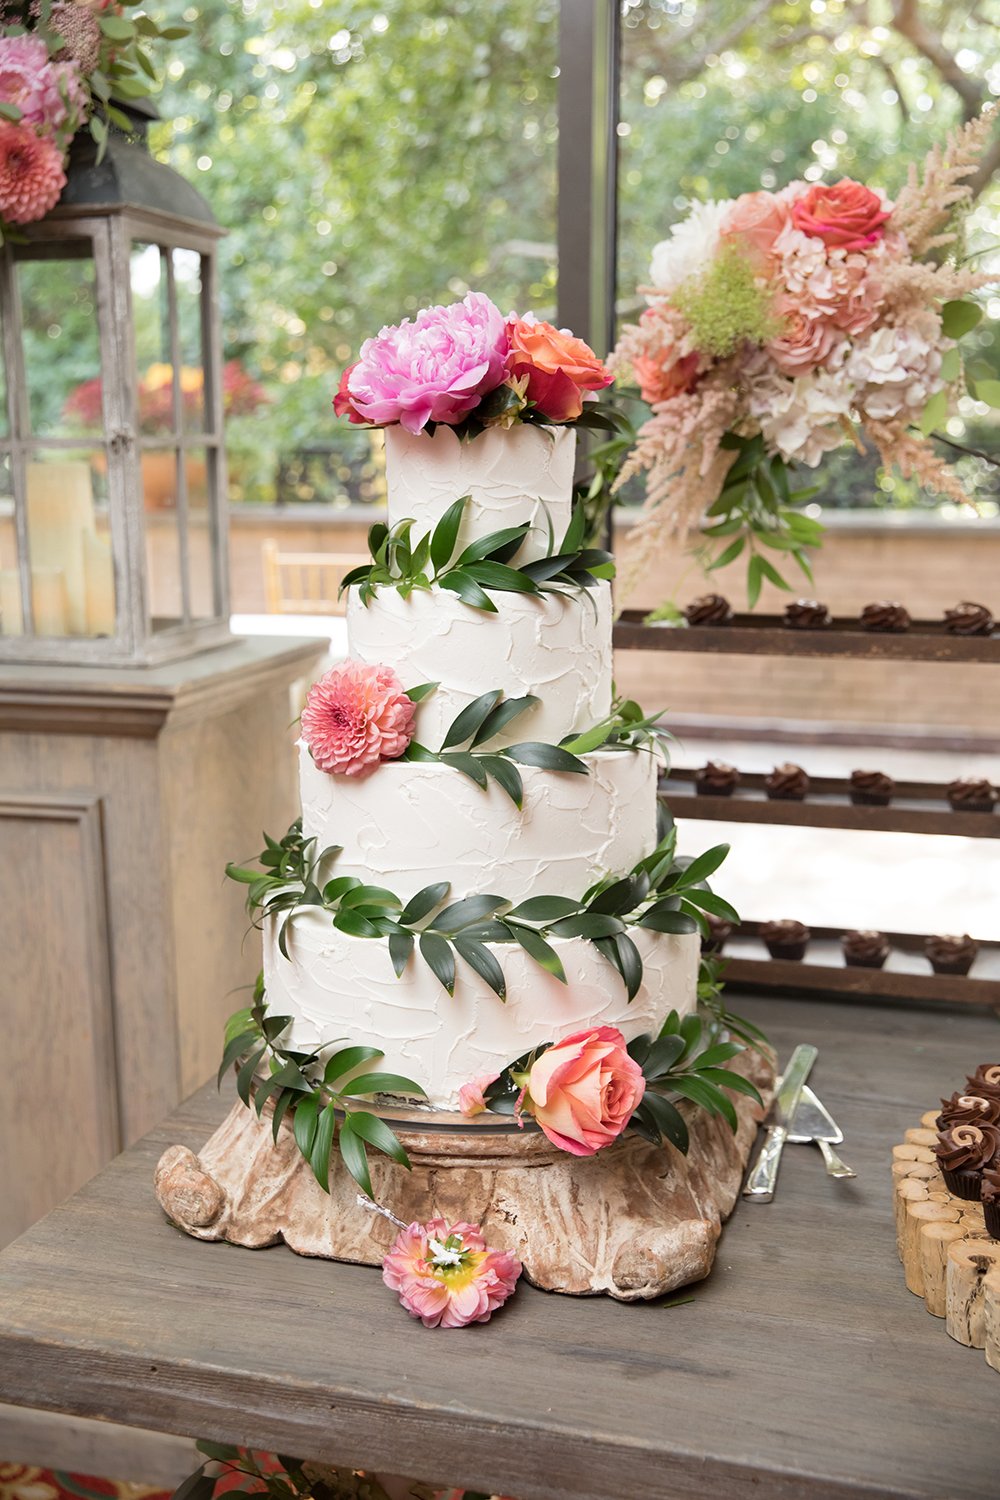 Houstonian Hotel, cake, susies cake, confections, susie, susie's, flower, pink, wood, tower, rustic